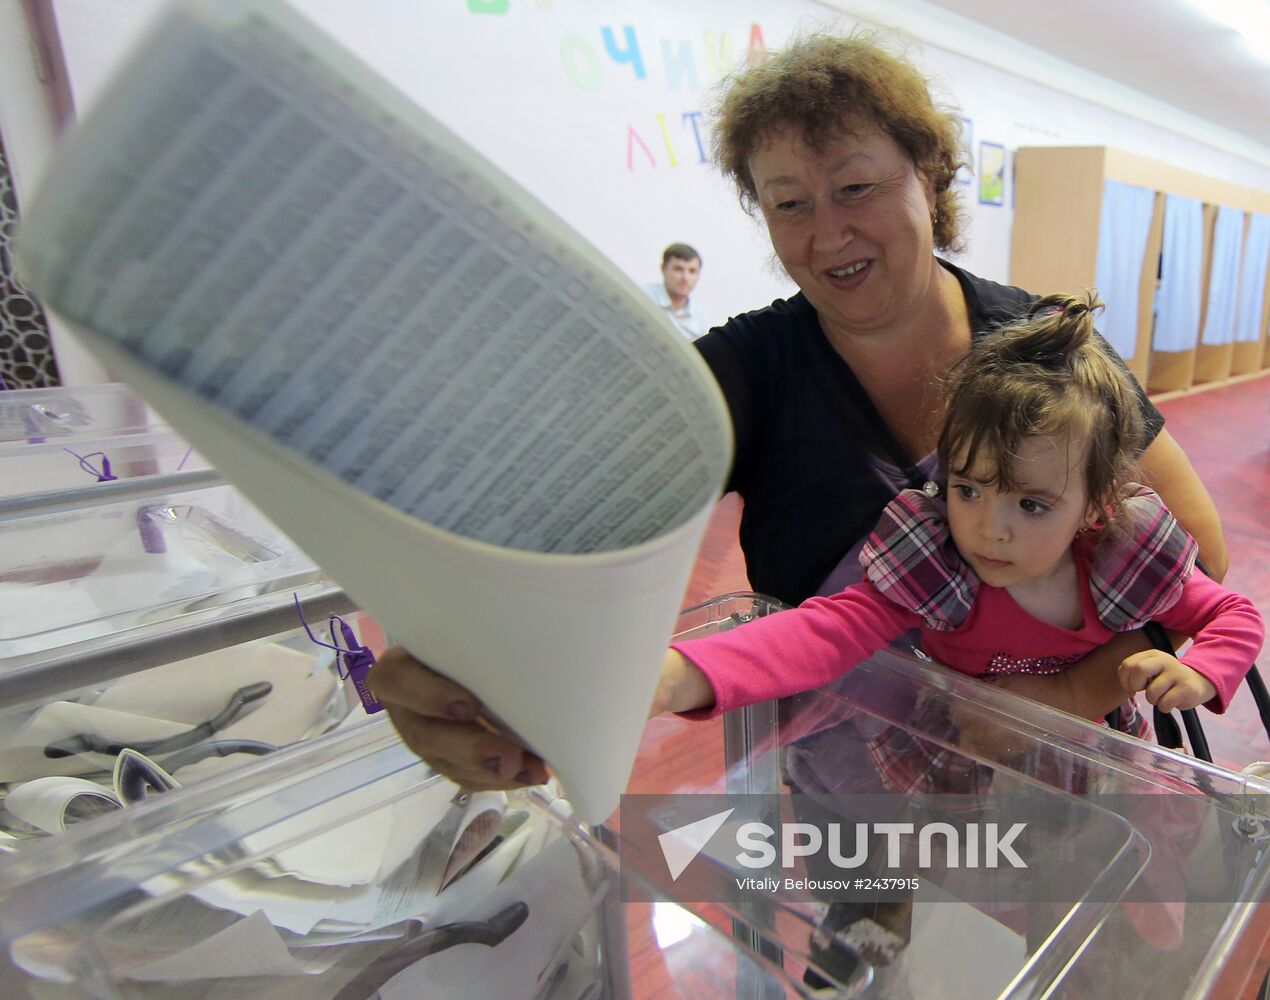 Ukraine votes in early presidential election